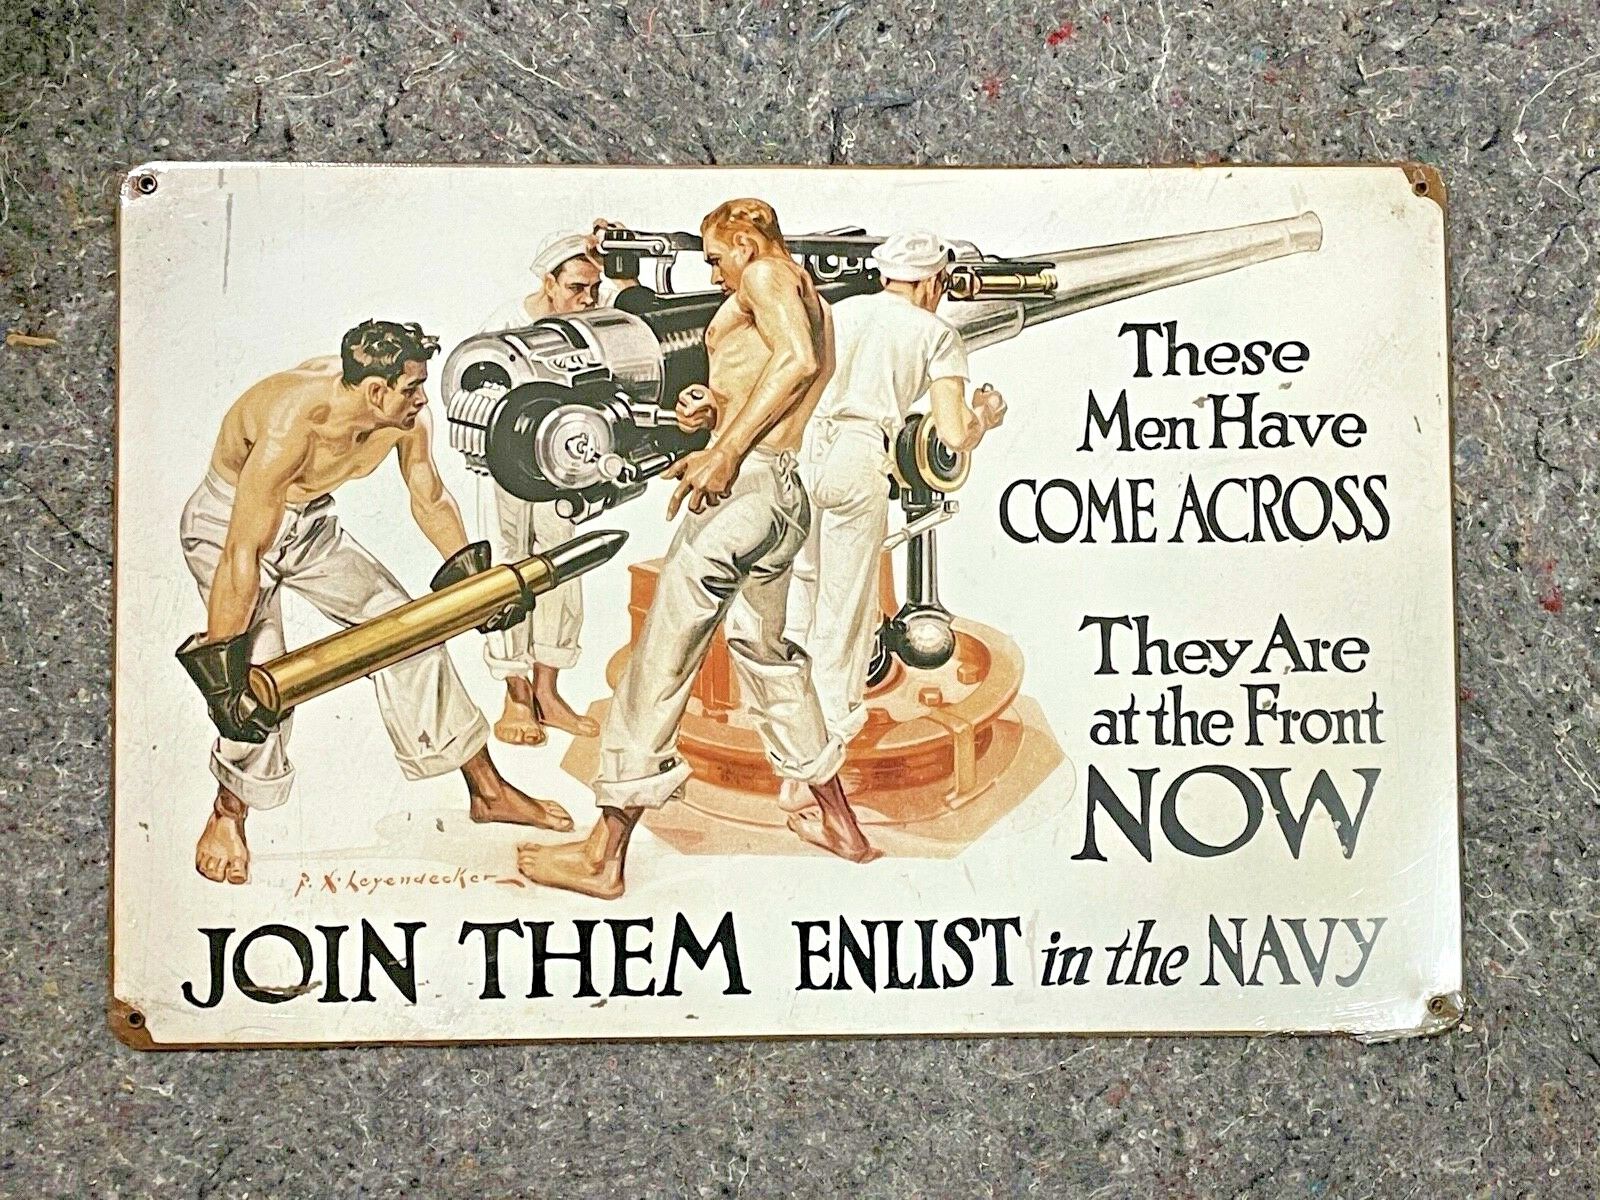 WW1 NAVY RECRUITMENT POSTER VINTAGE STYLE METAL SIGN ENLIST IN THE NAVY 11 X 17